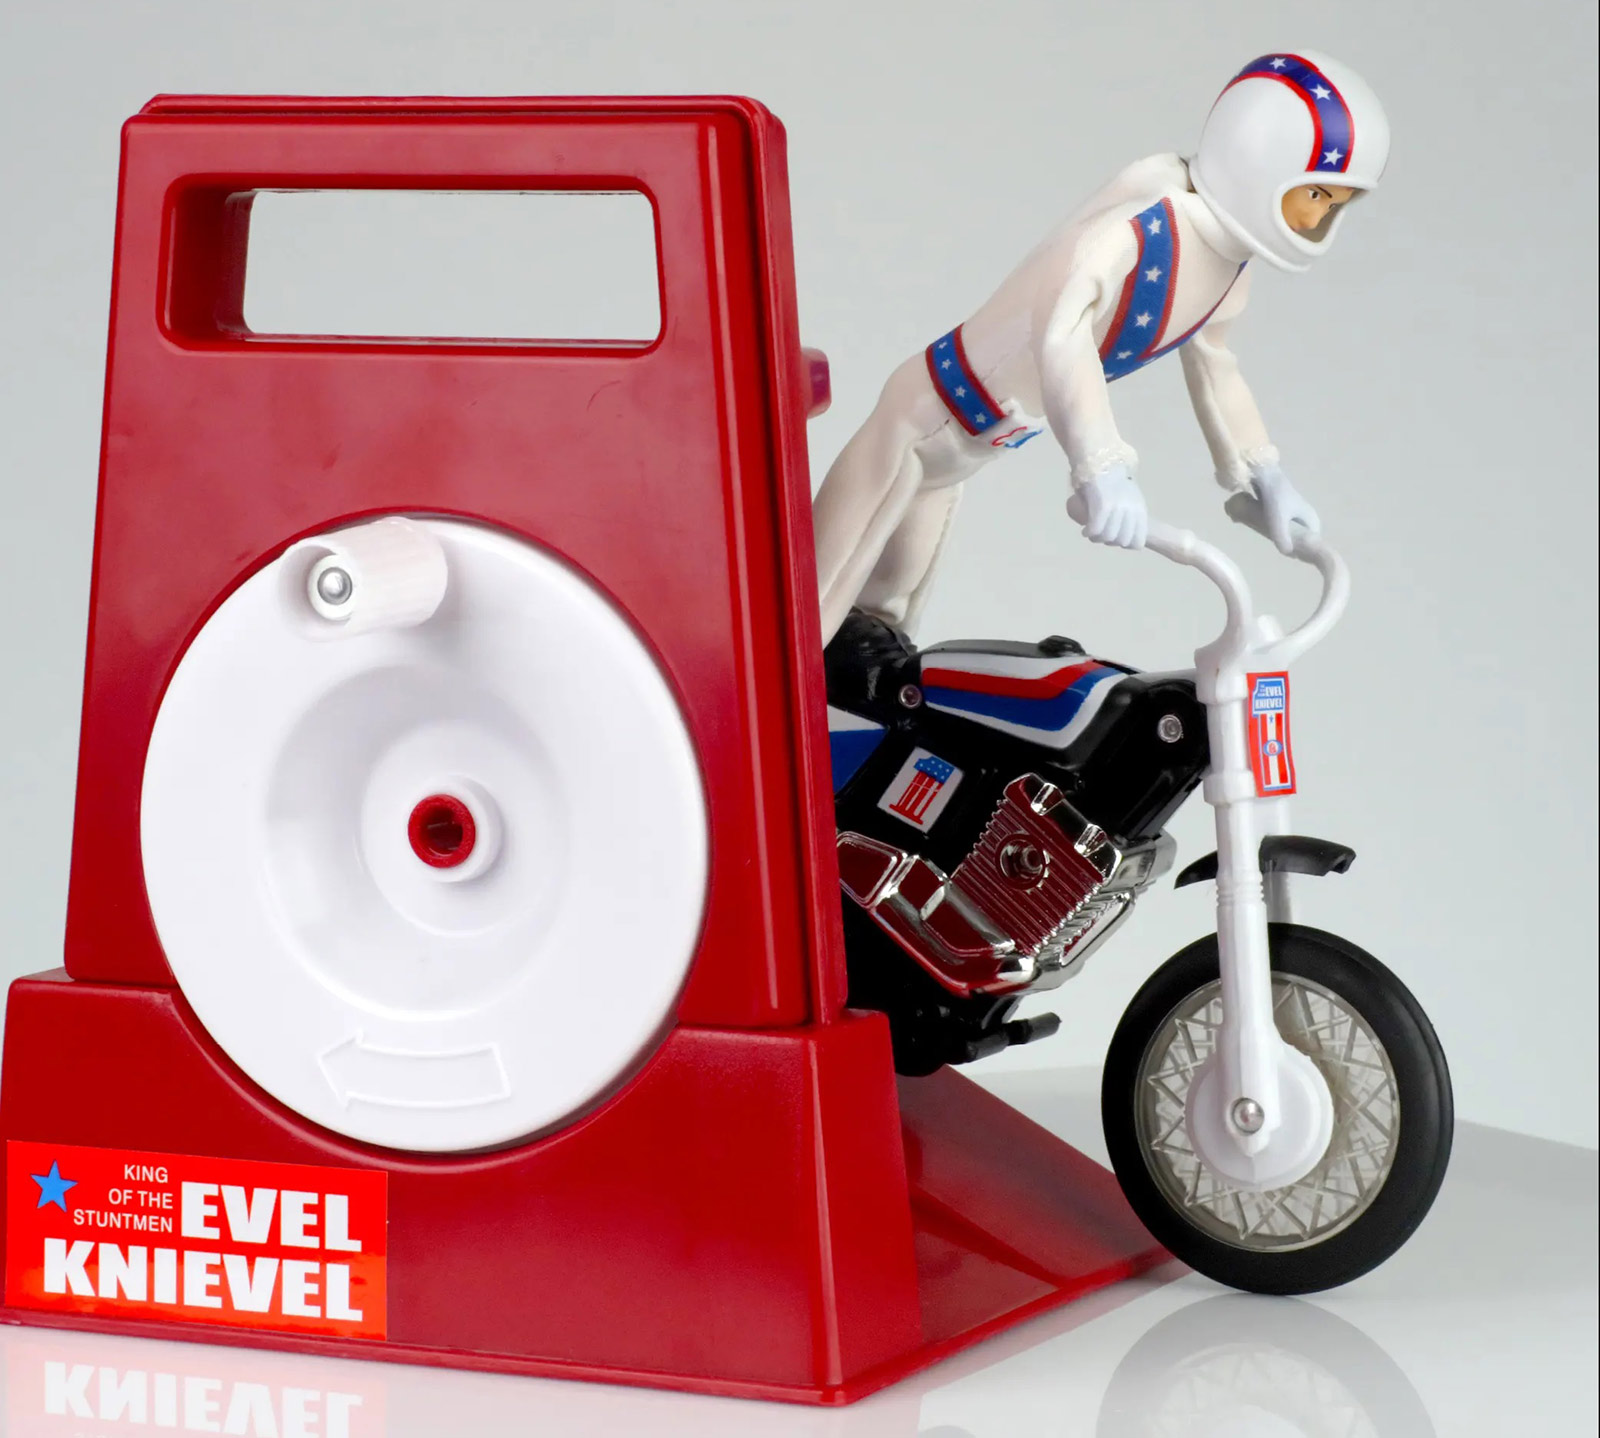 Ideal THREE Evel Knievel Stunt Cycle Poster Prints Strato-Cycle 